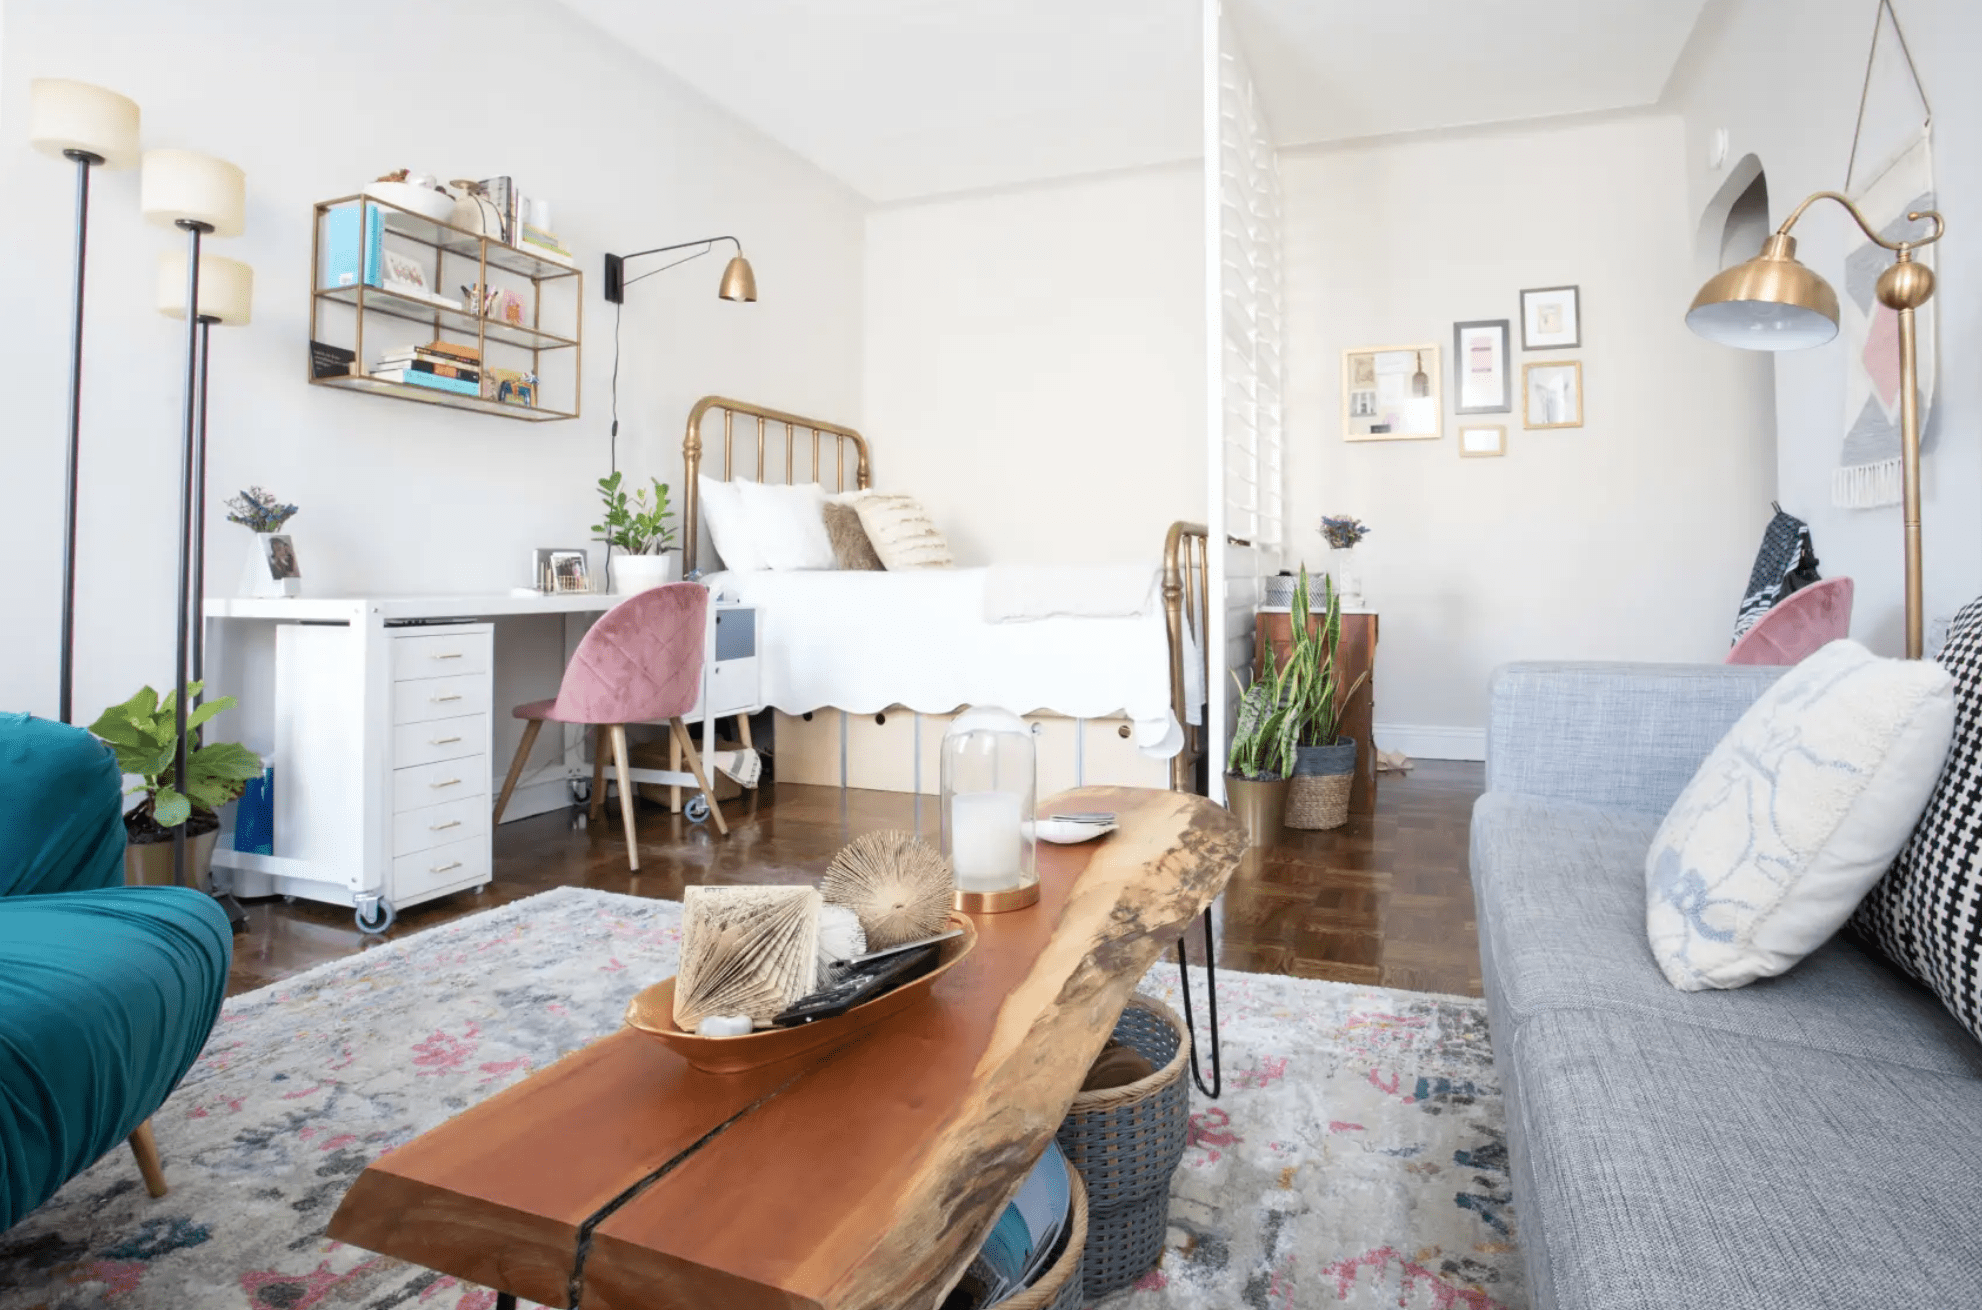 How To Make The Most Out Of Your Studio Apartment | Apartment Therapy